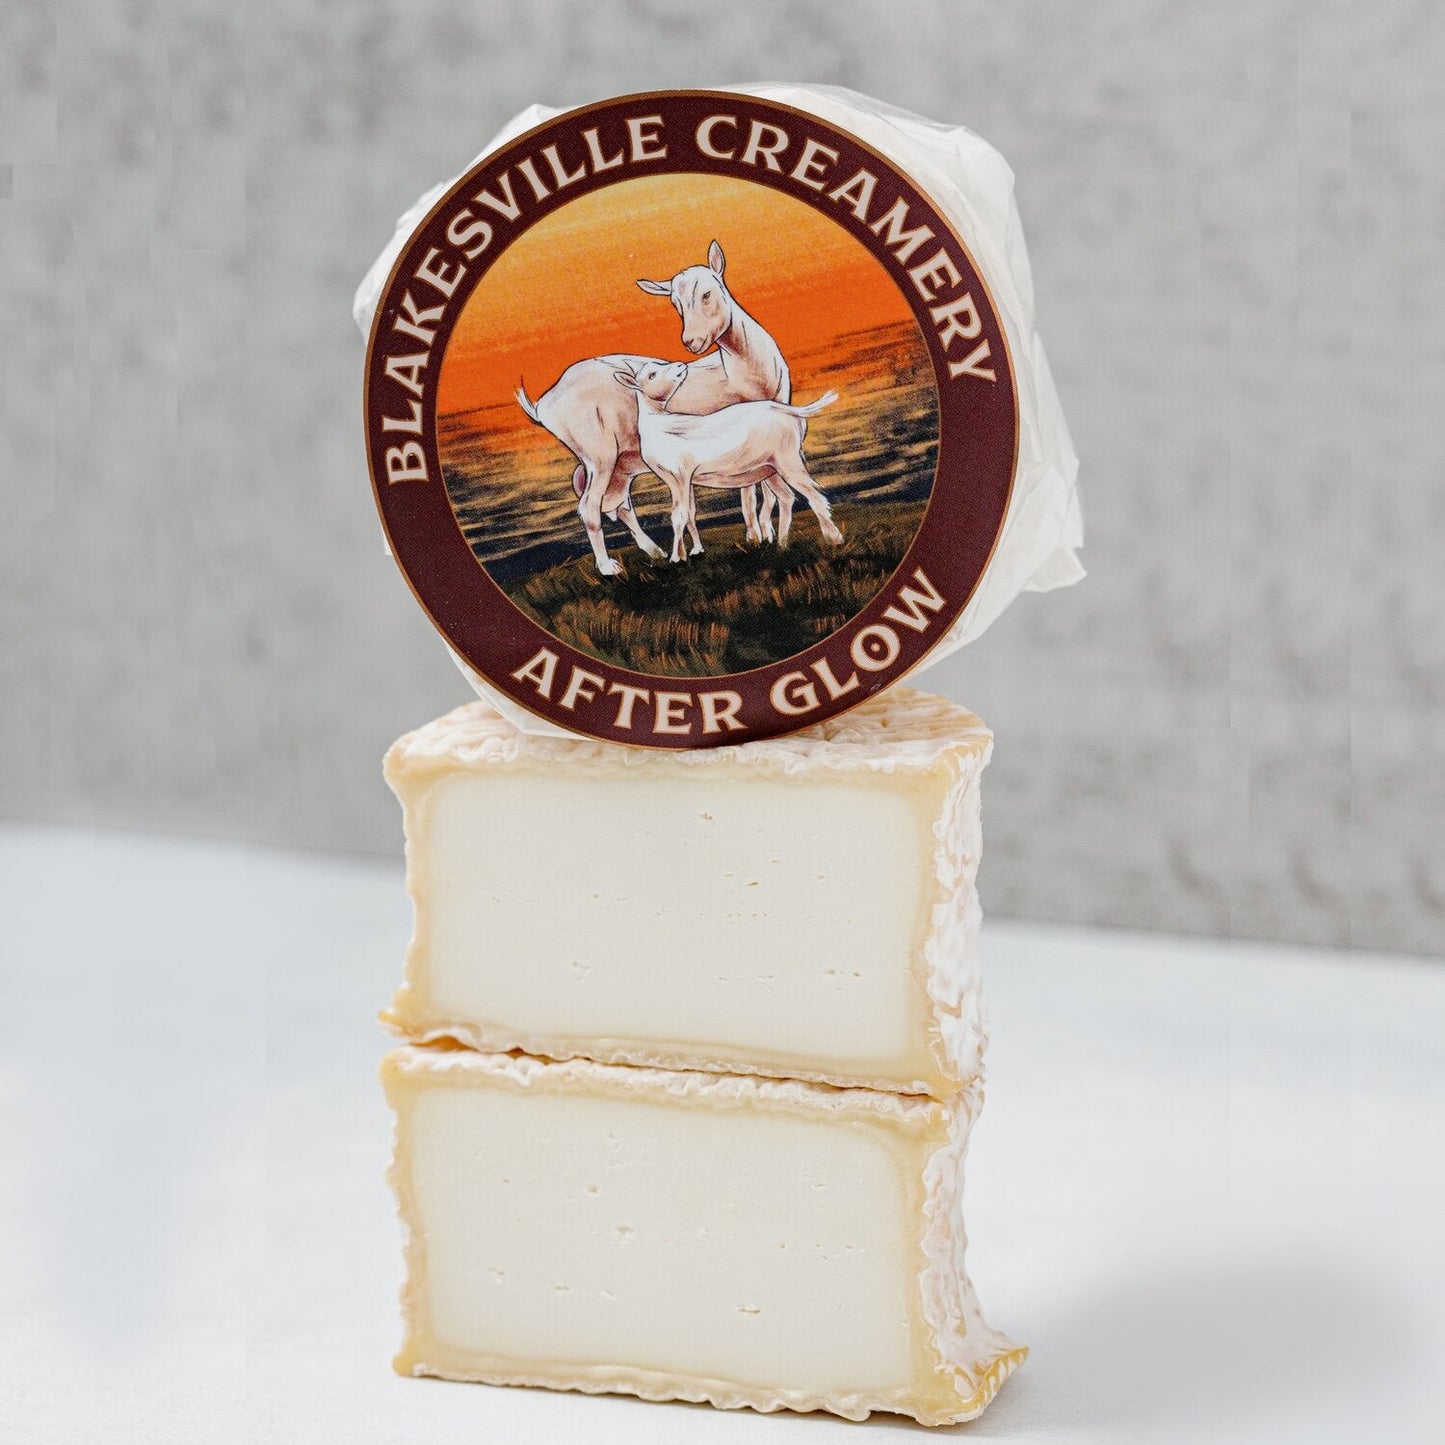 Afterglow, Belgian Red Ale-Washed Goat Cheese, Blakesville Creamery, Port Washington, WI (5oz) - DECANTsf